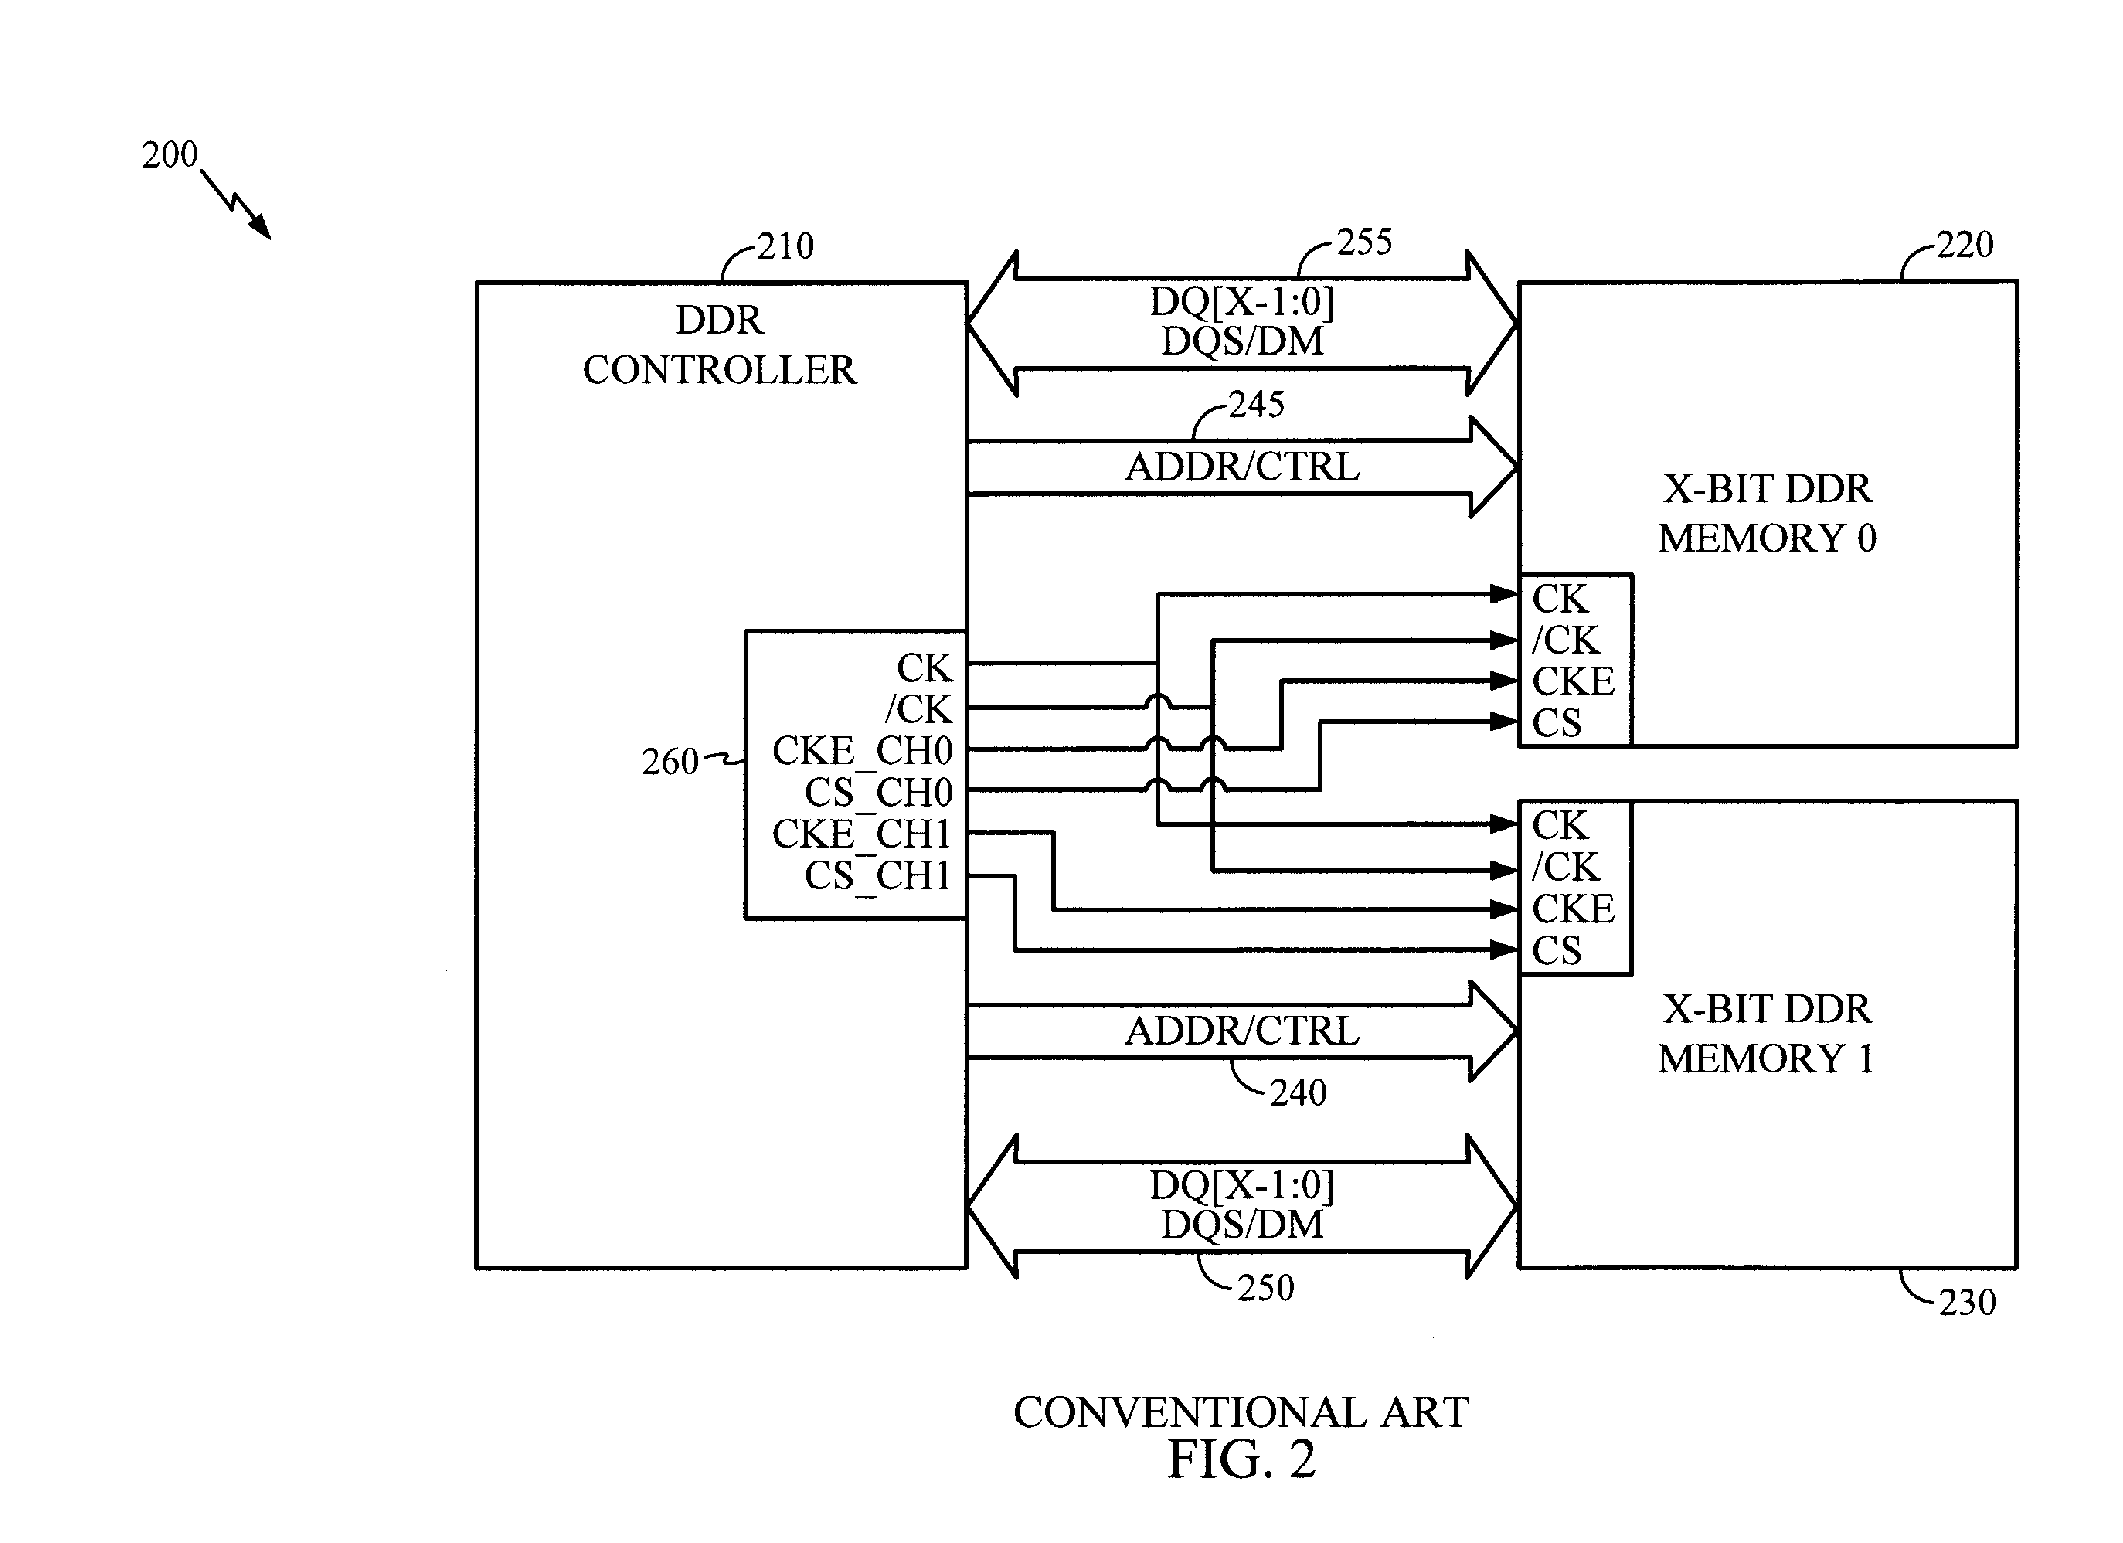 Dual Channel Memory Architecture Having a Reduced Interface Pin Requirements Using a Double Data Rate Scheme for the Address/Control Signals